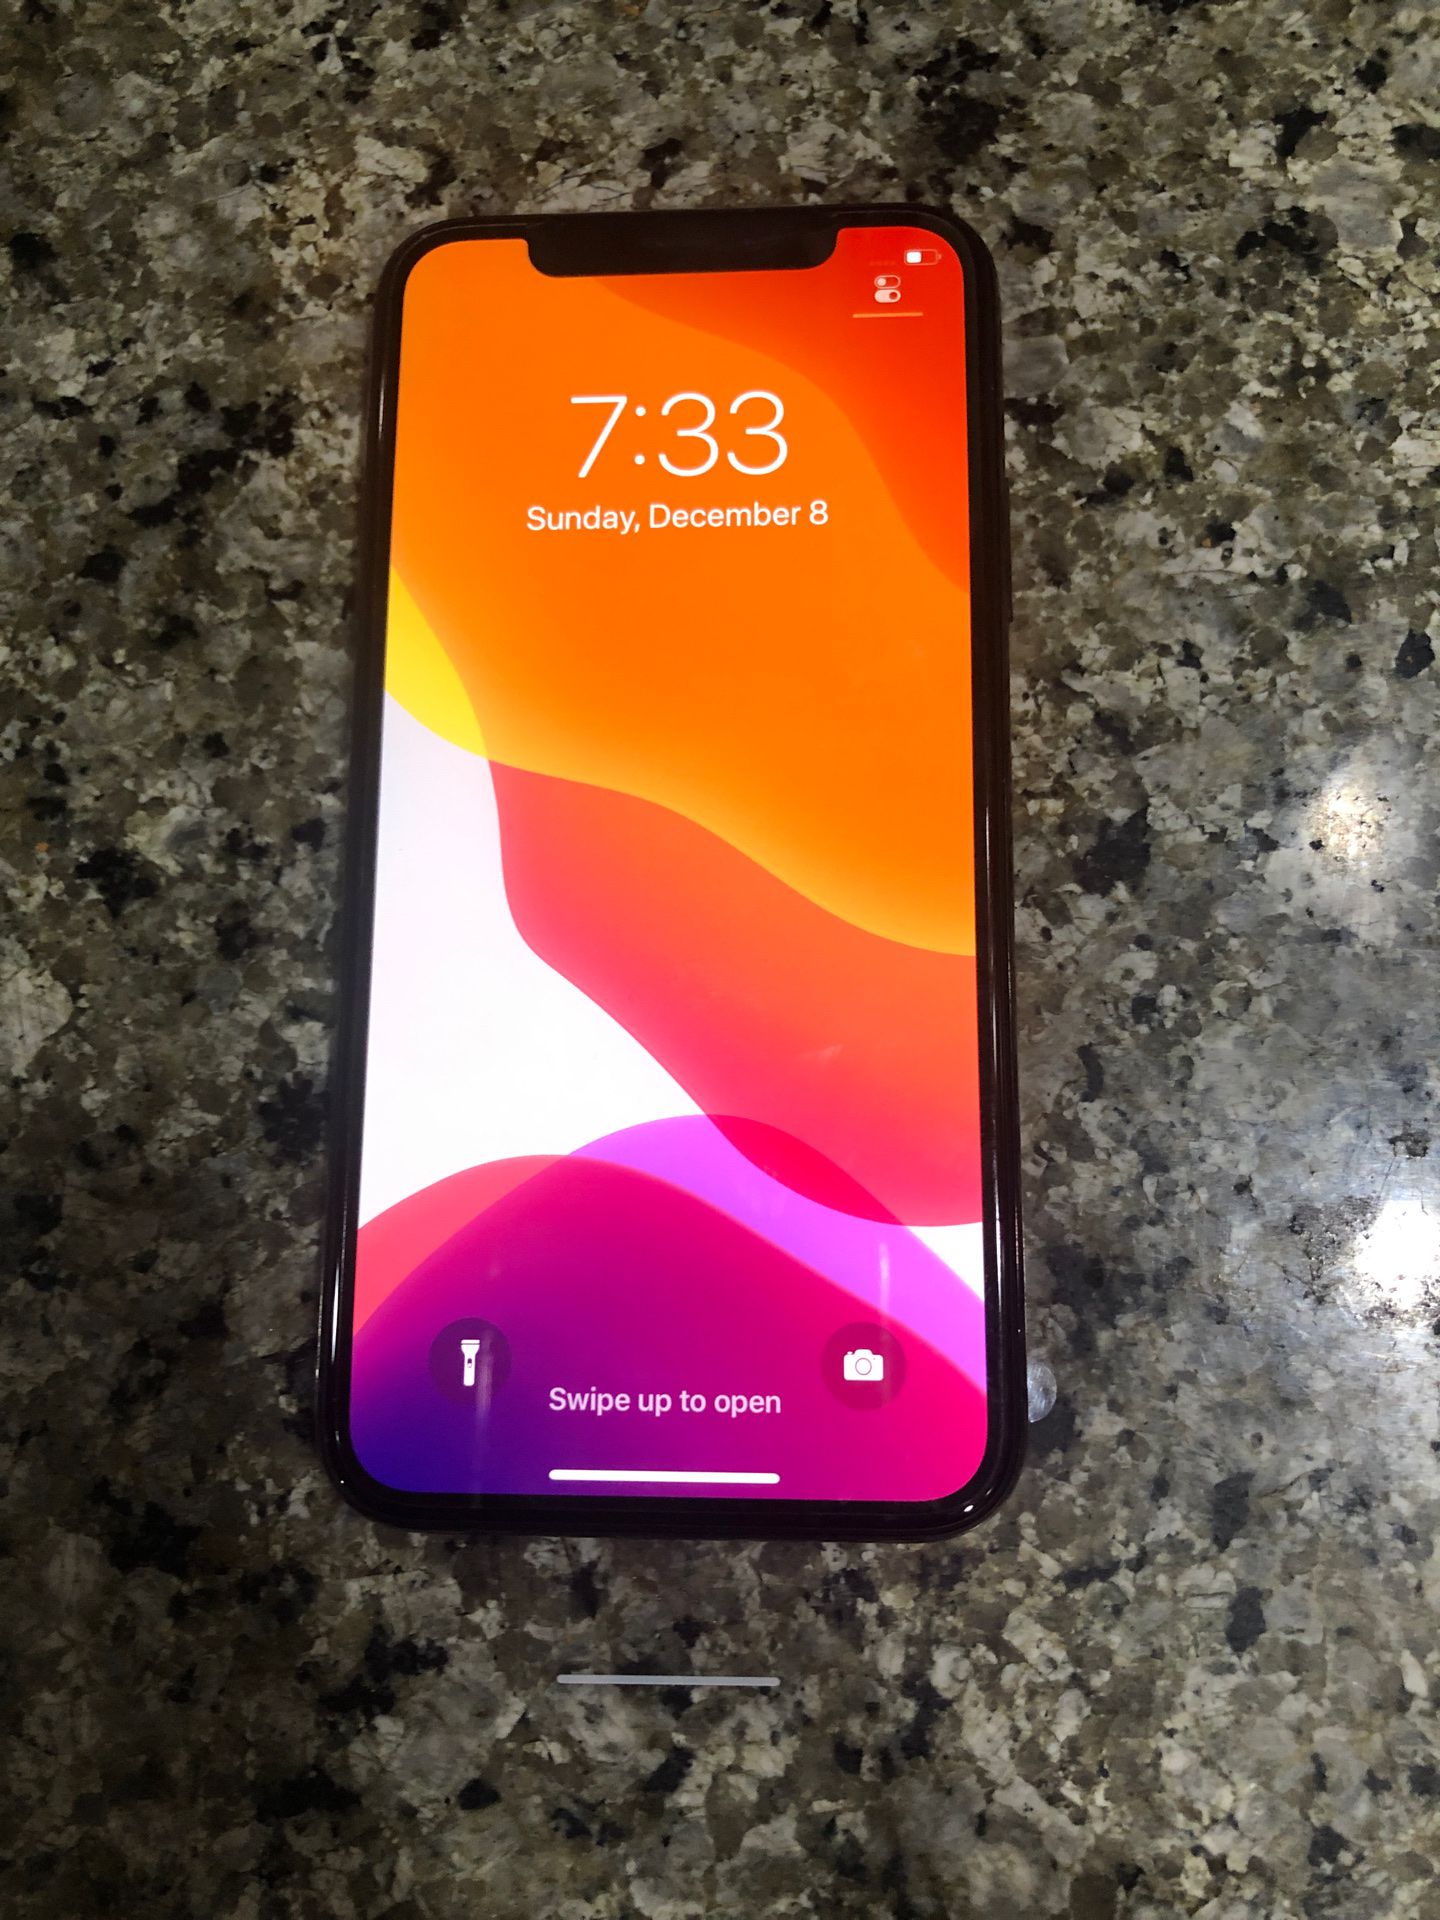 IPhone X 64 unlocked with Apple care plus protection